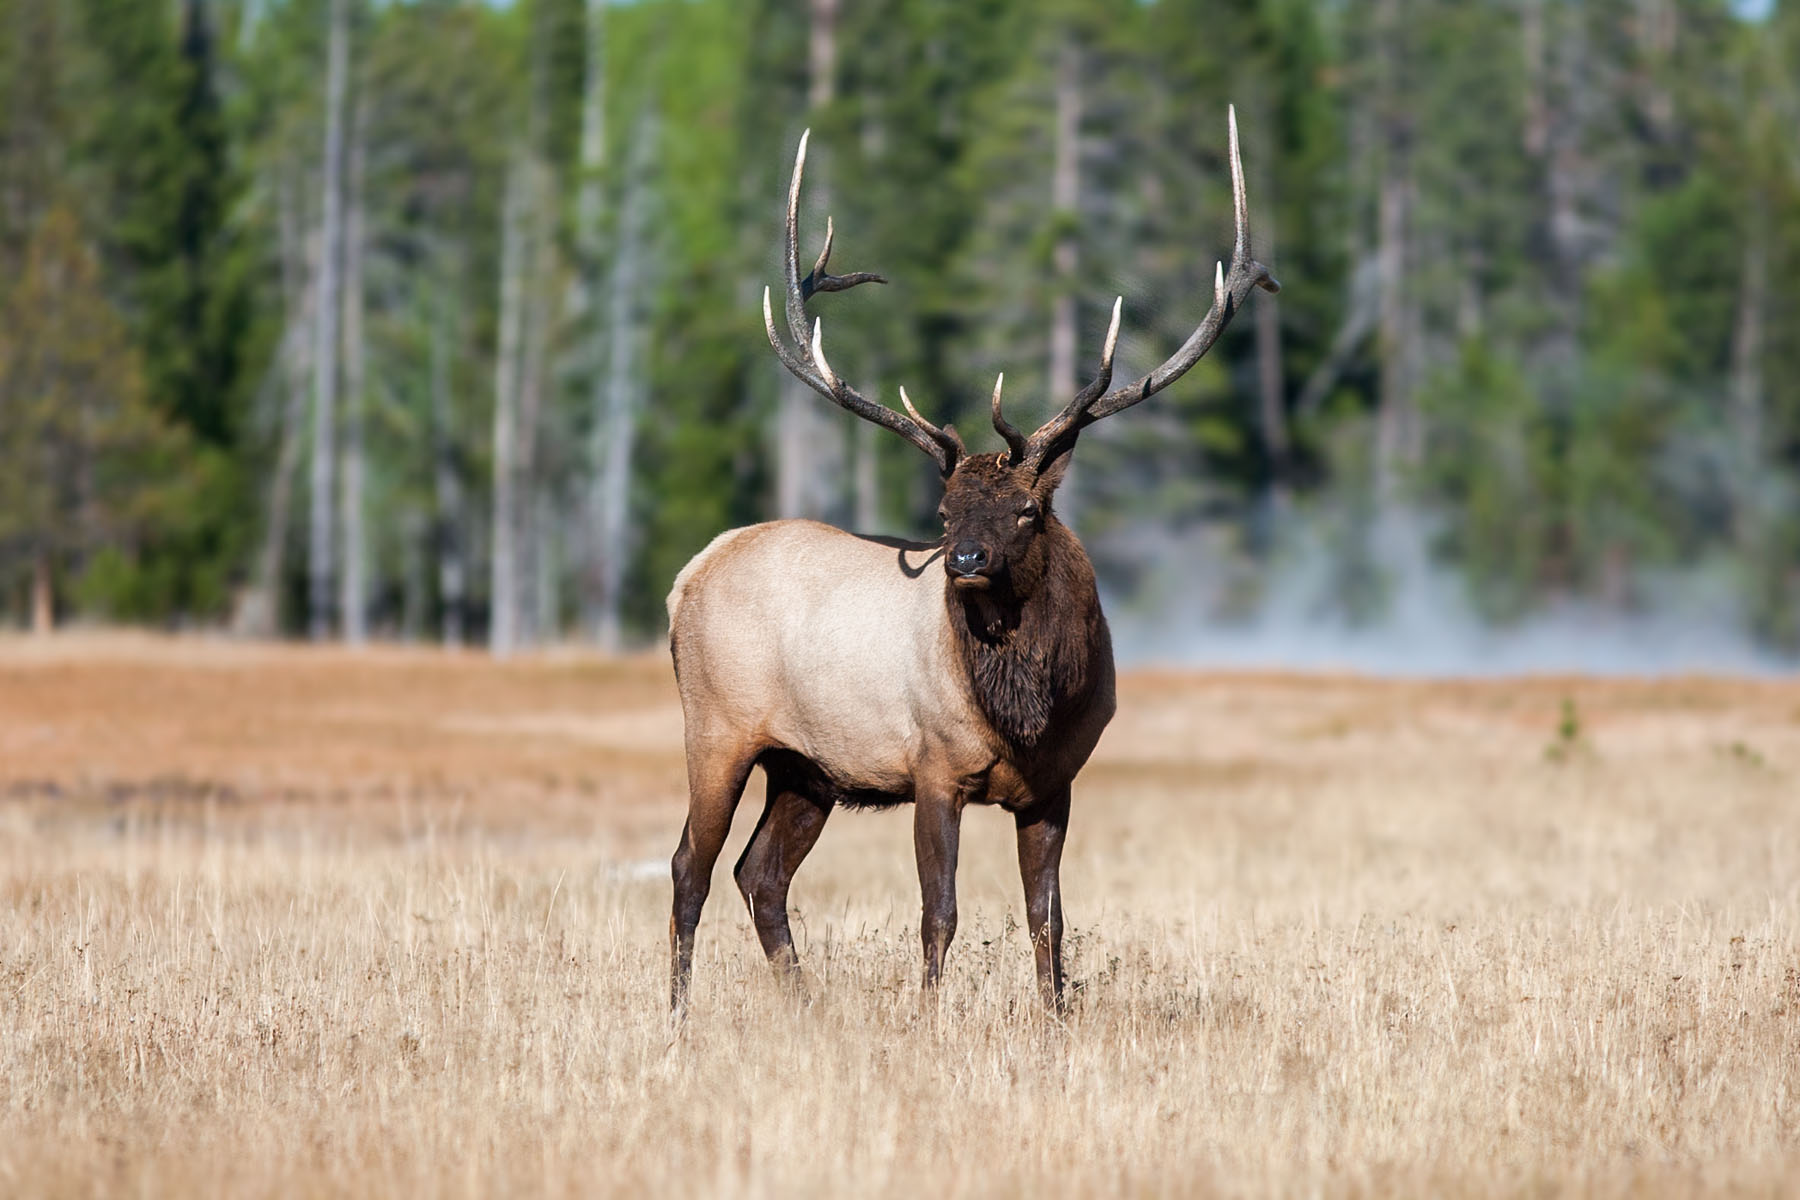 Bull elk scans the horizon in Yellowstone.  Click for next photo.